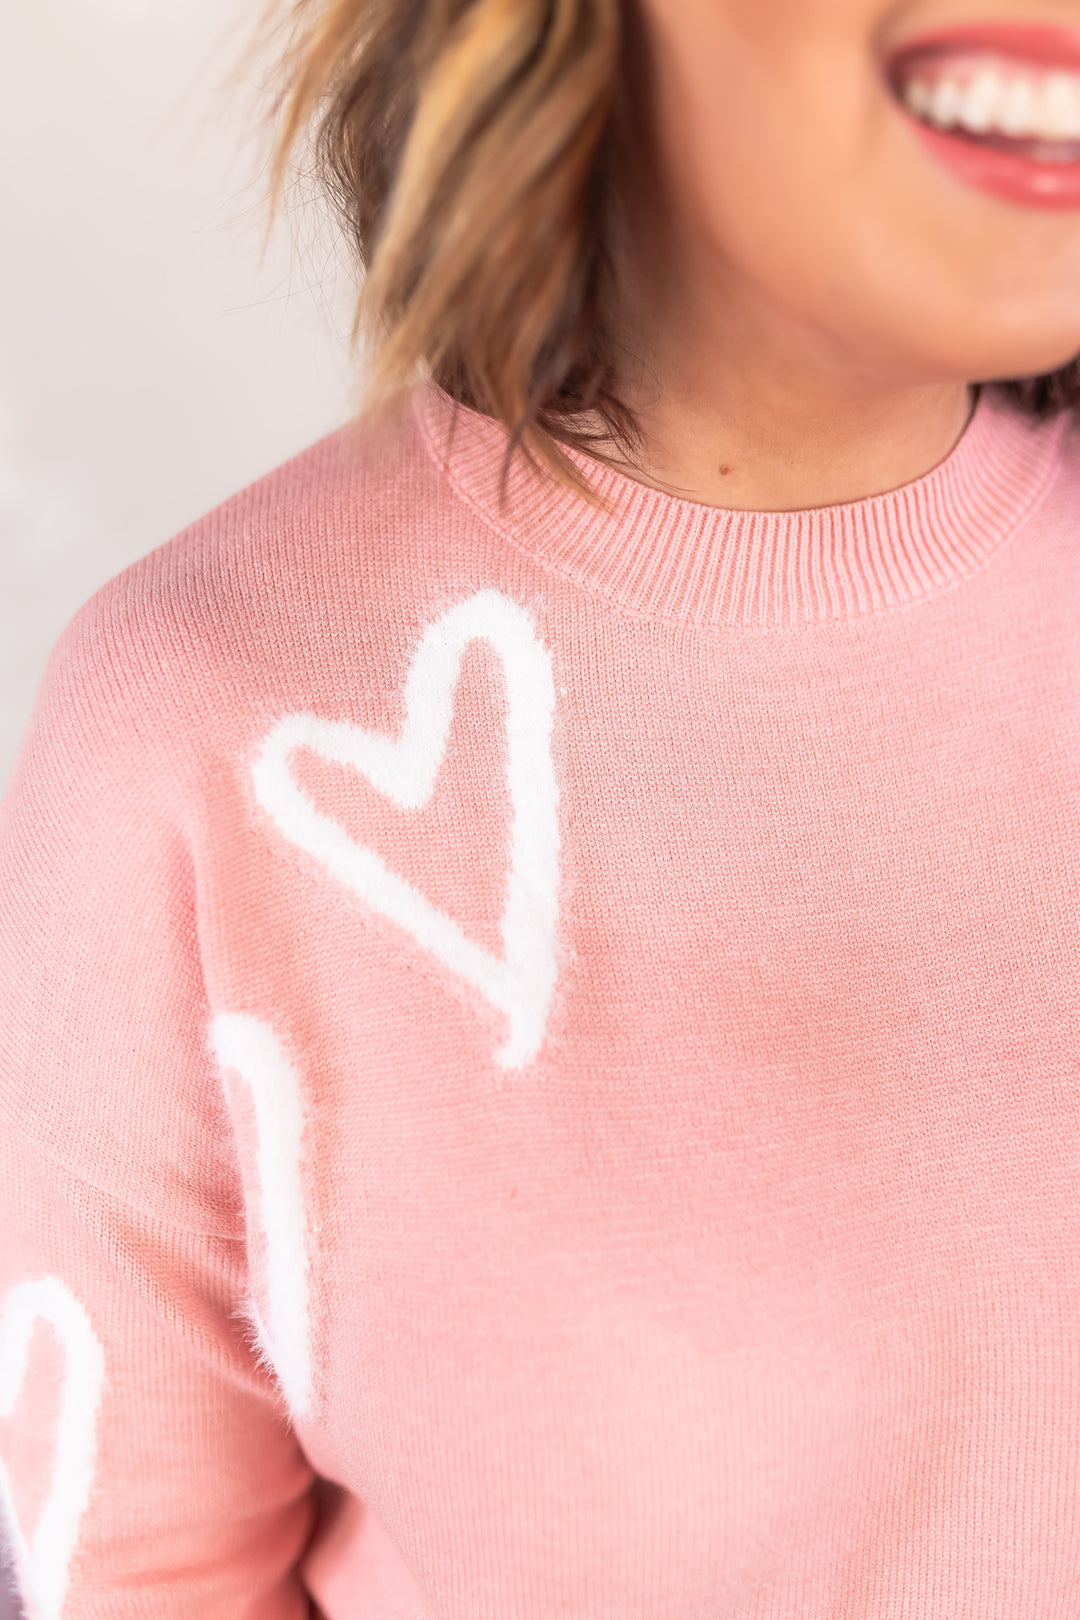 The Heart to Heart Sweater